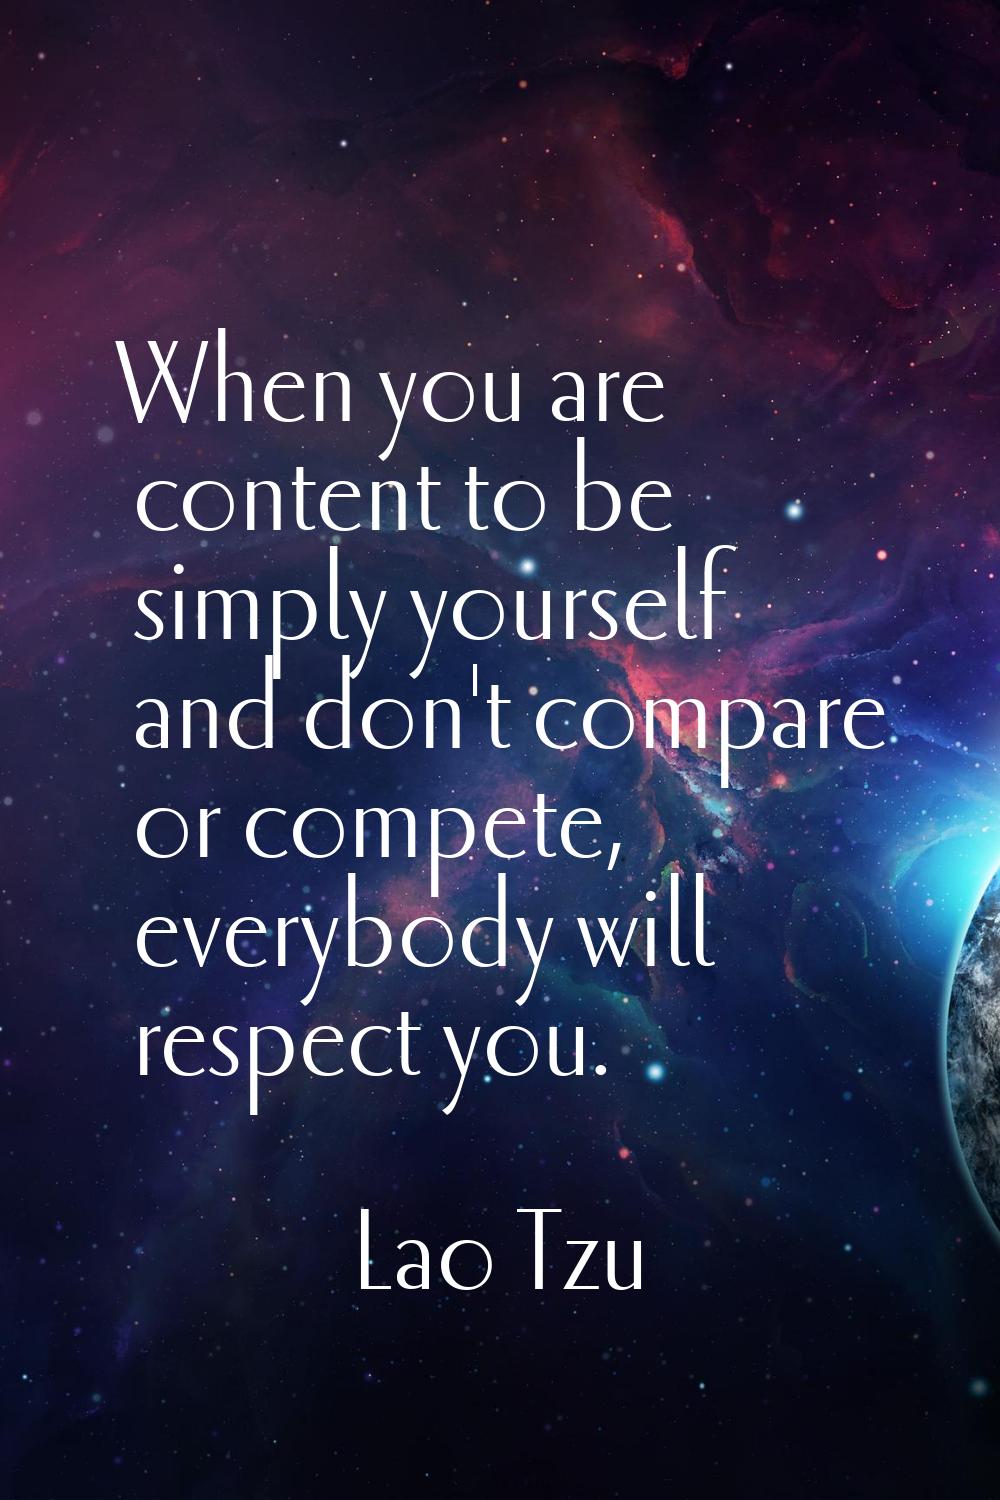 When you are content to be simply yourself and don't compare or compete, everybody will respect you